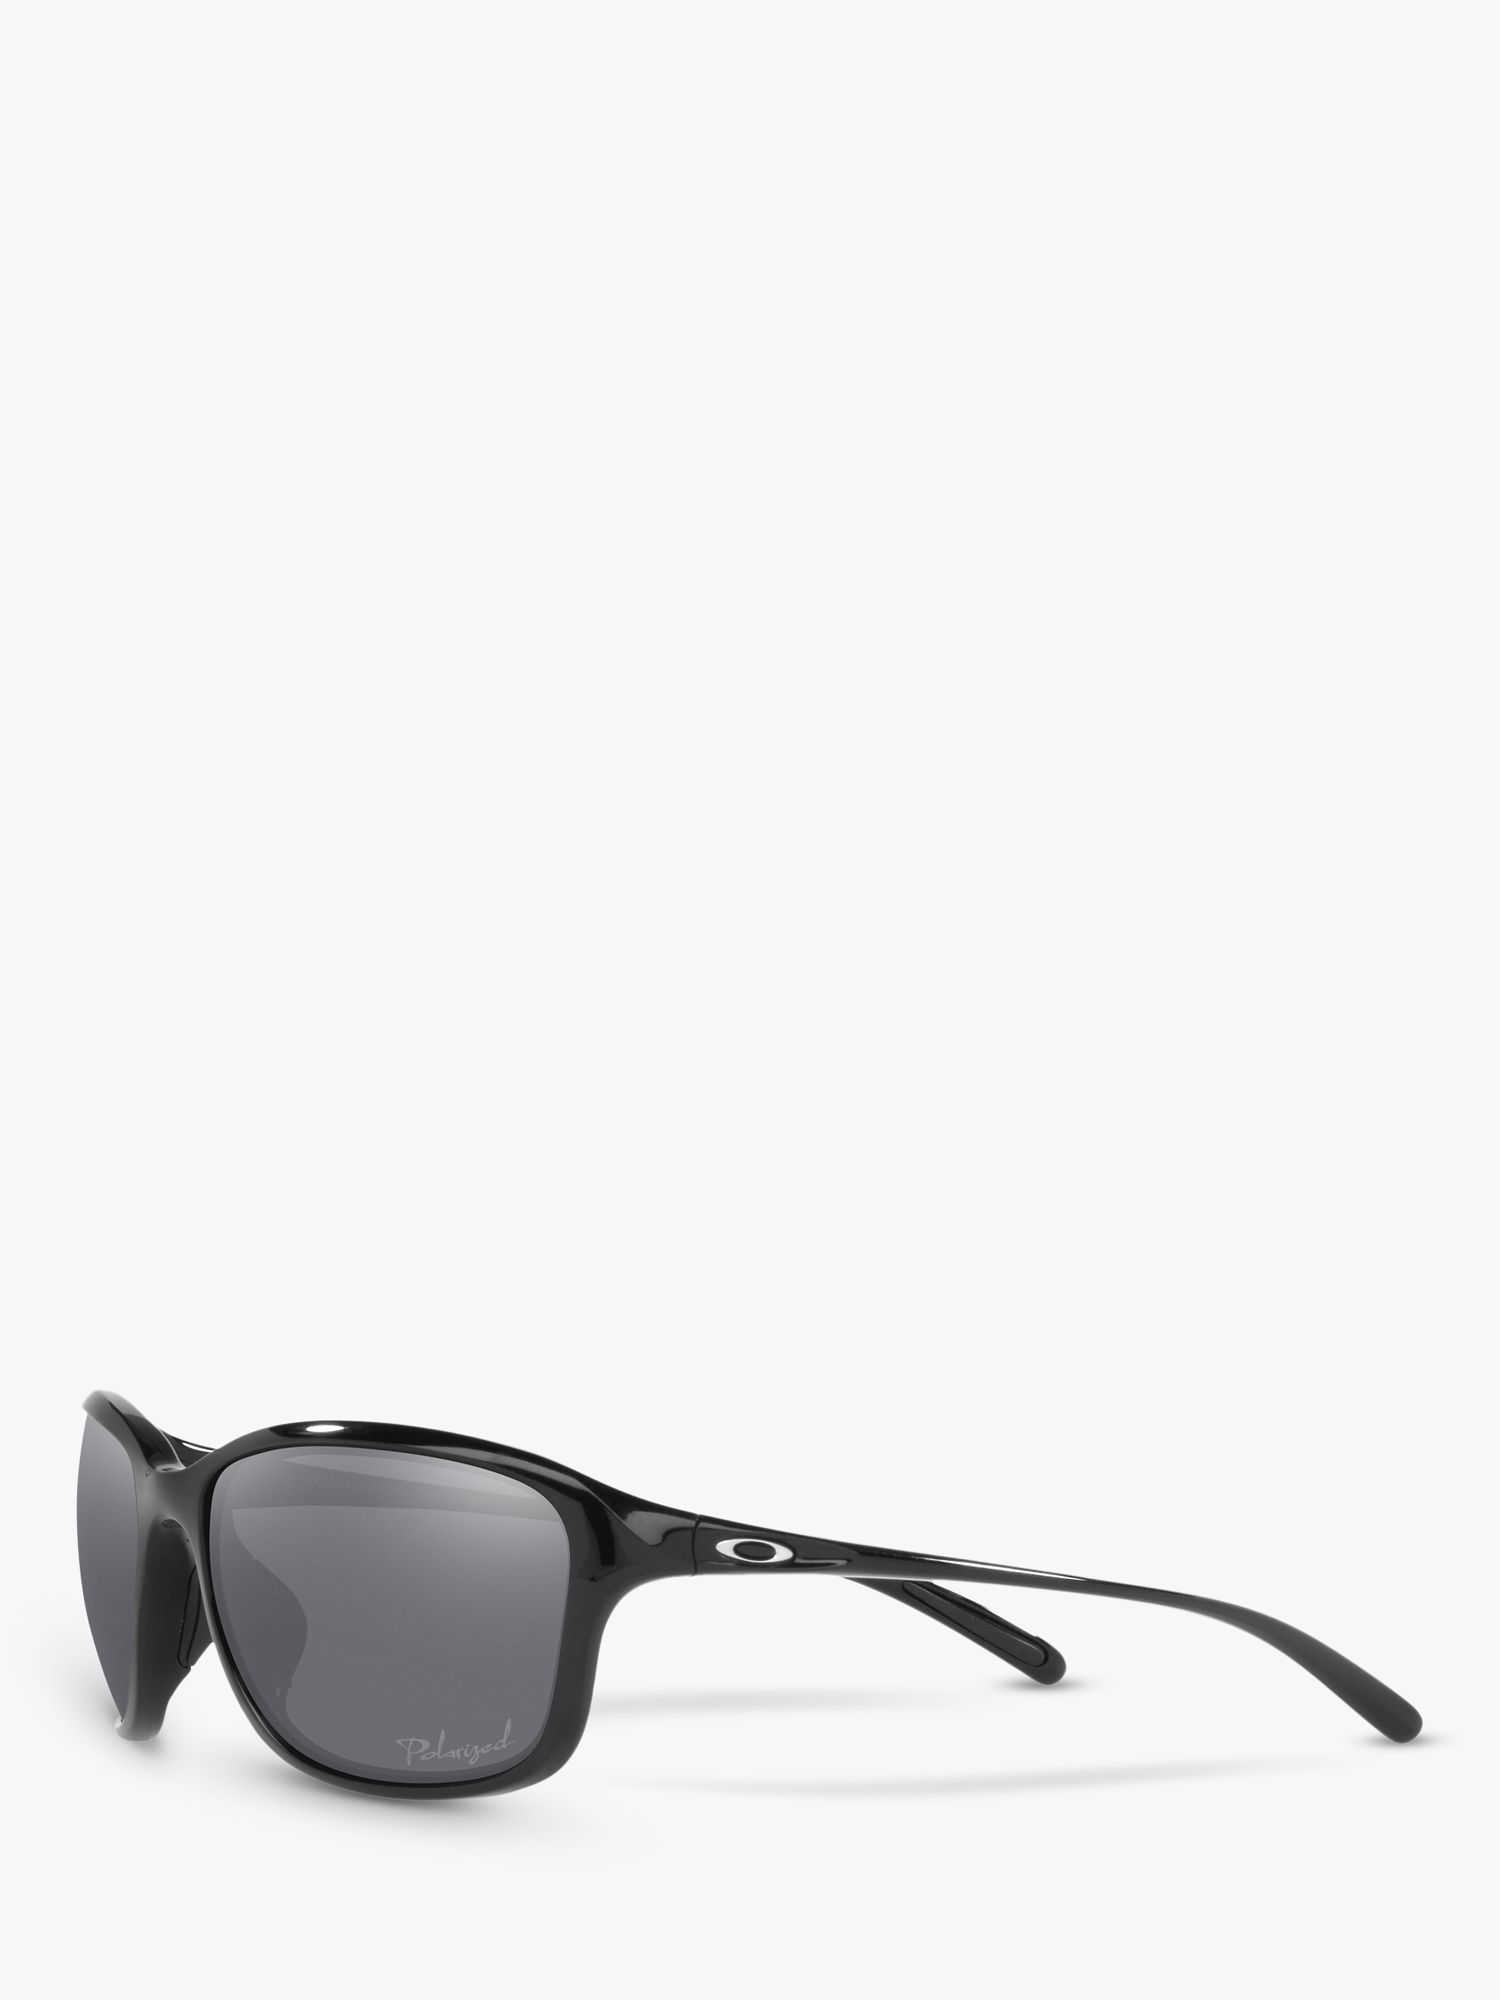 Oakley OO9297 Women's She's Unstoppable Polarised Oval Sunglasses, Polished Black/Mirror Grey